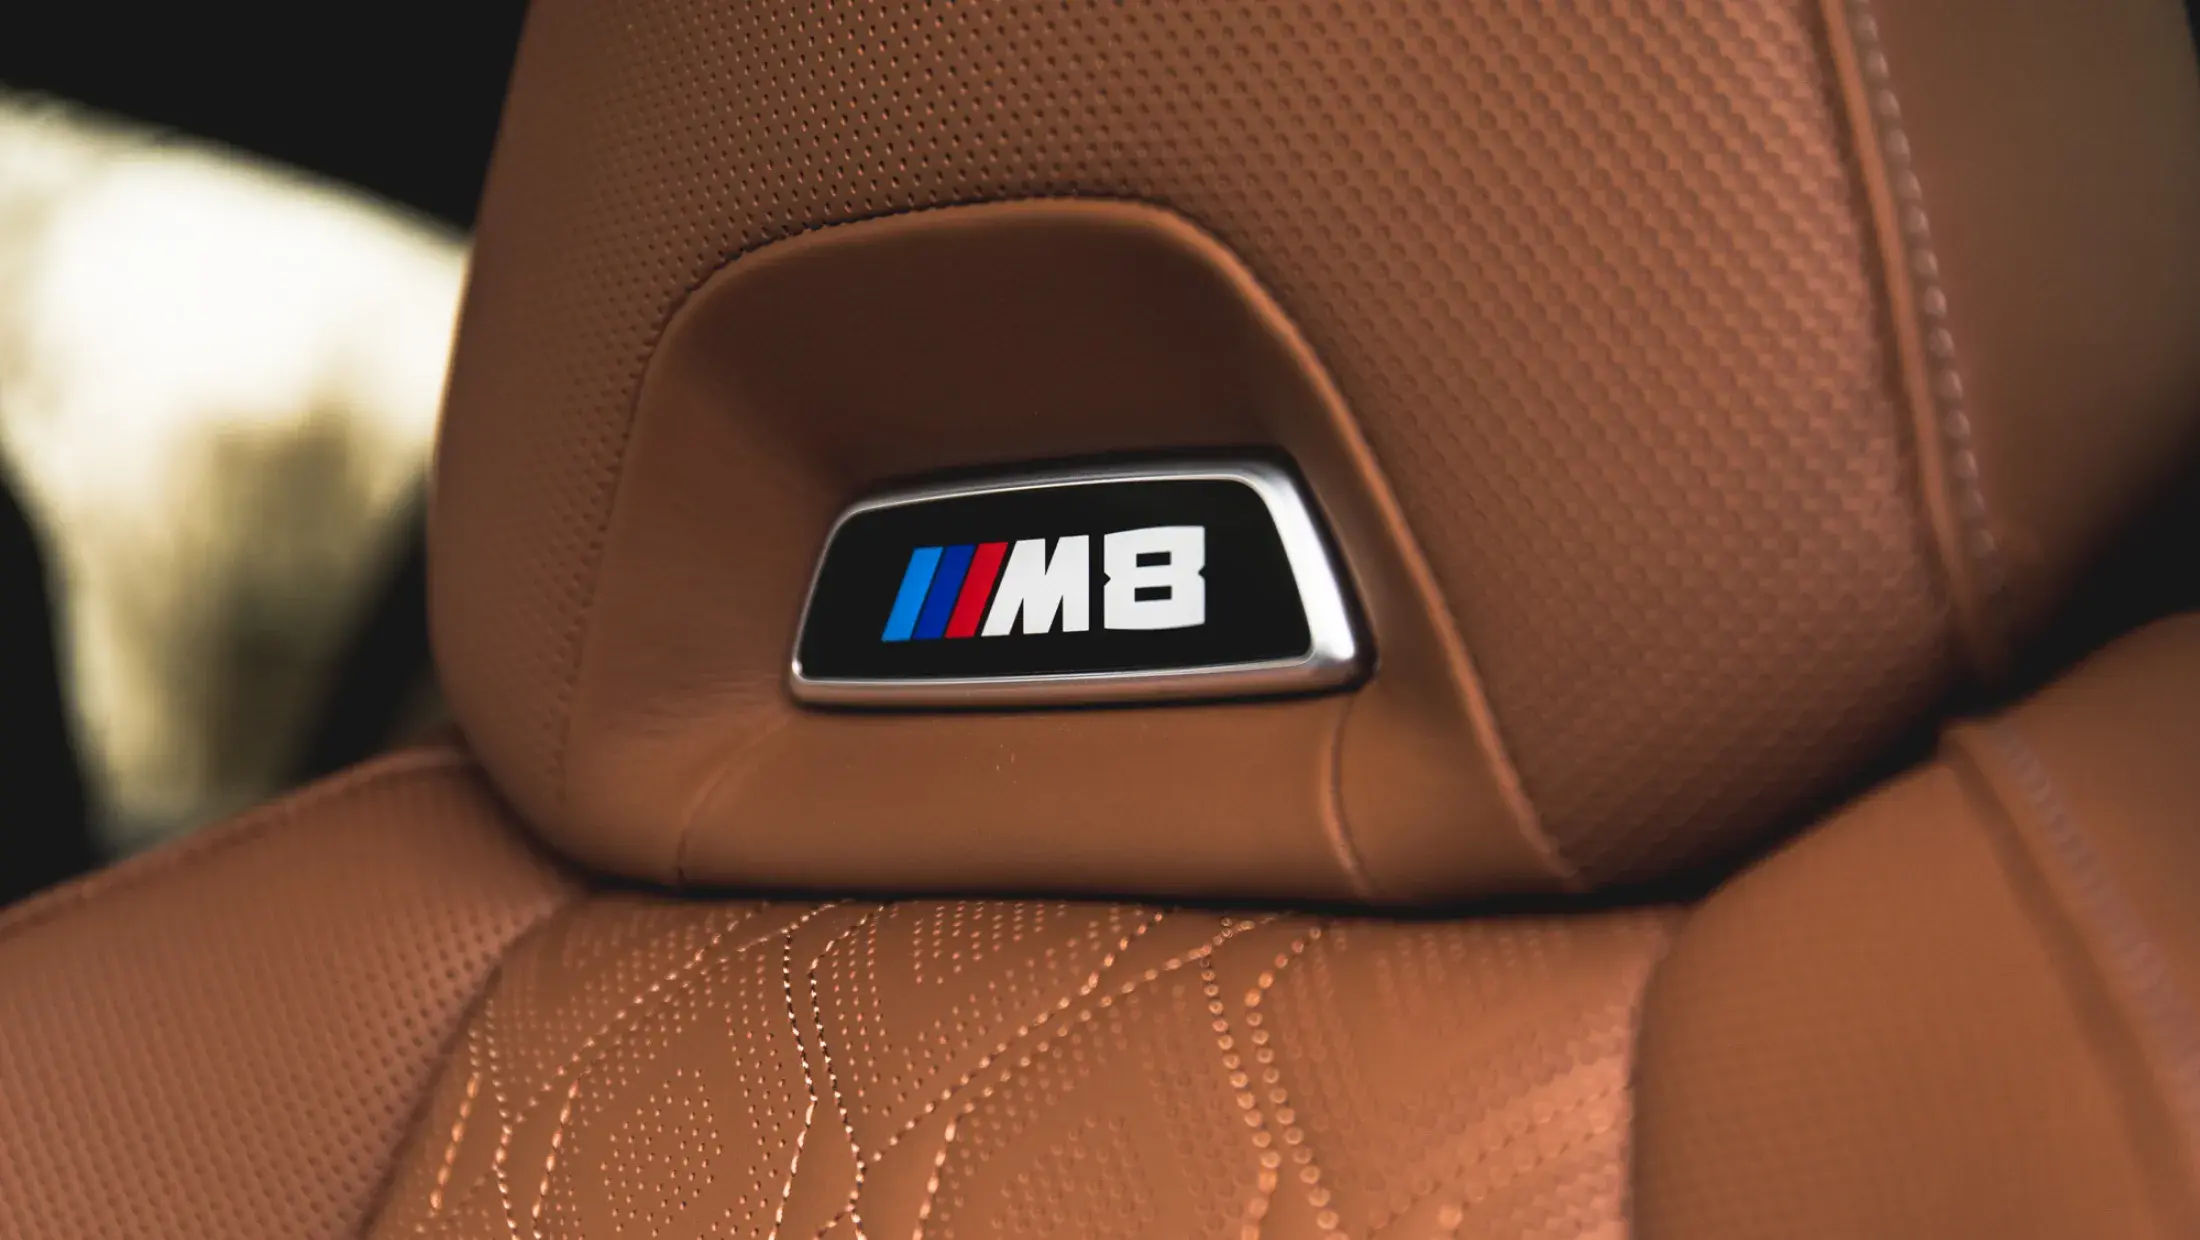 We drove an Irish Green BMW M8 Gran Coupé Competition for St. Patrick's Day